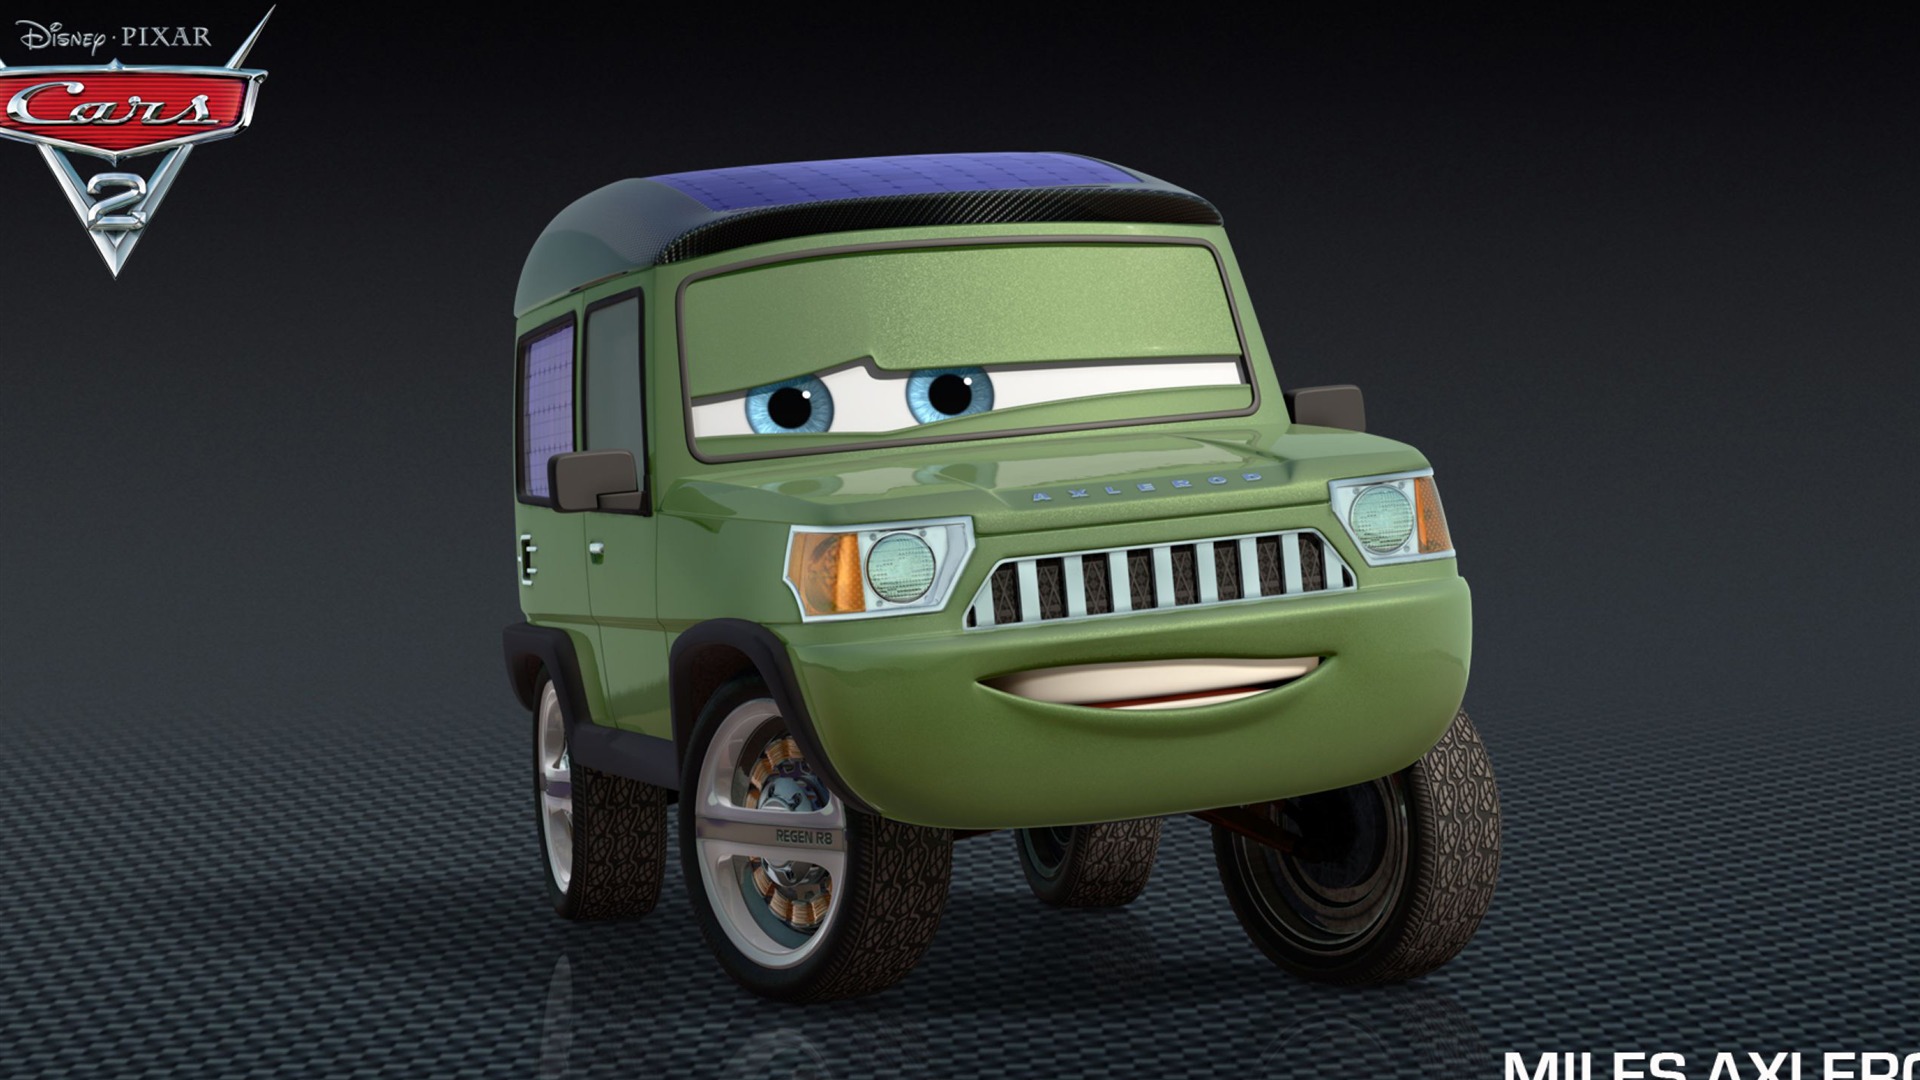 Cars 2 wallpapers #28 - 1920x1080